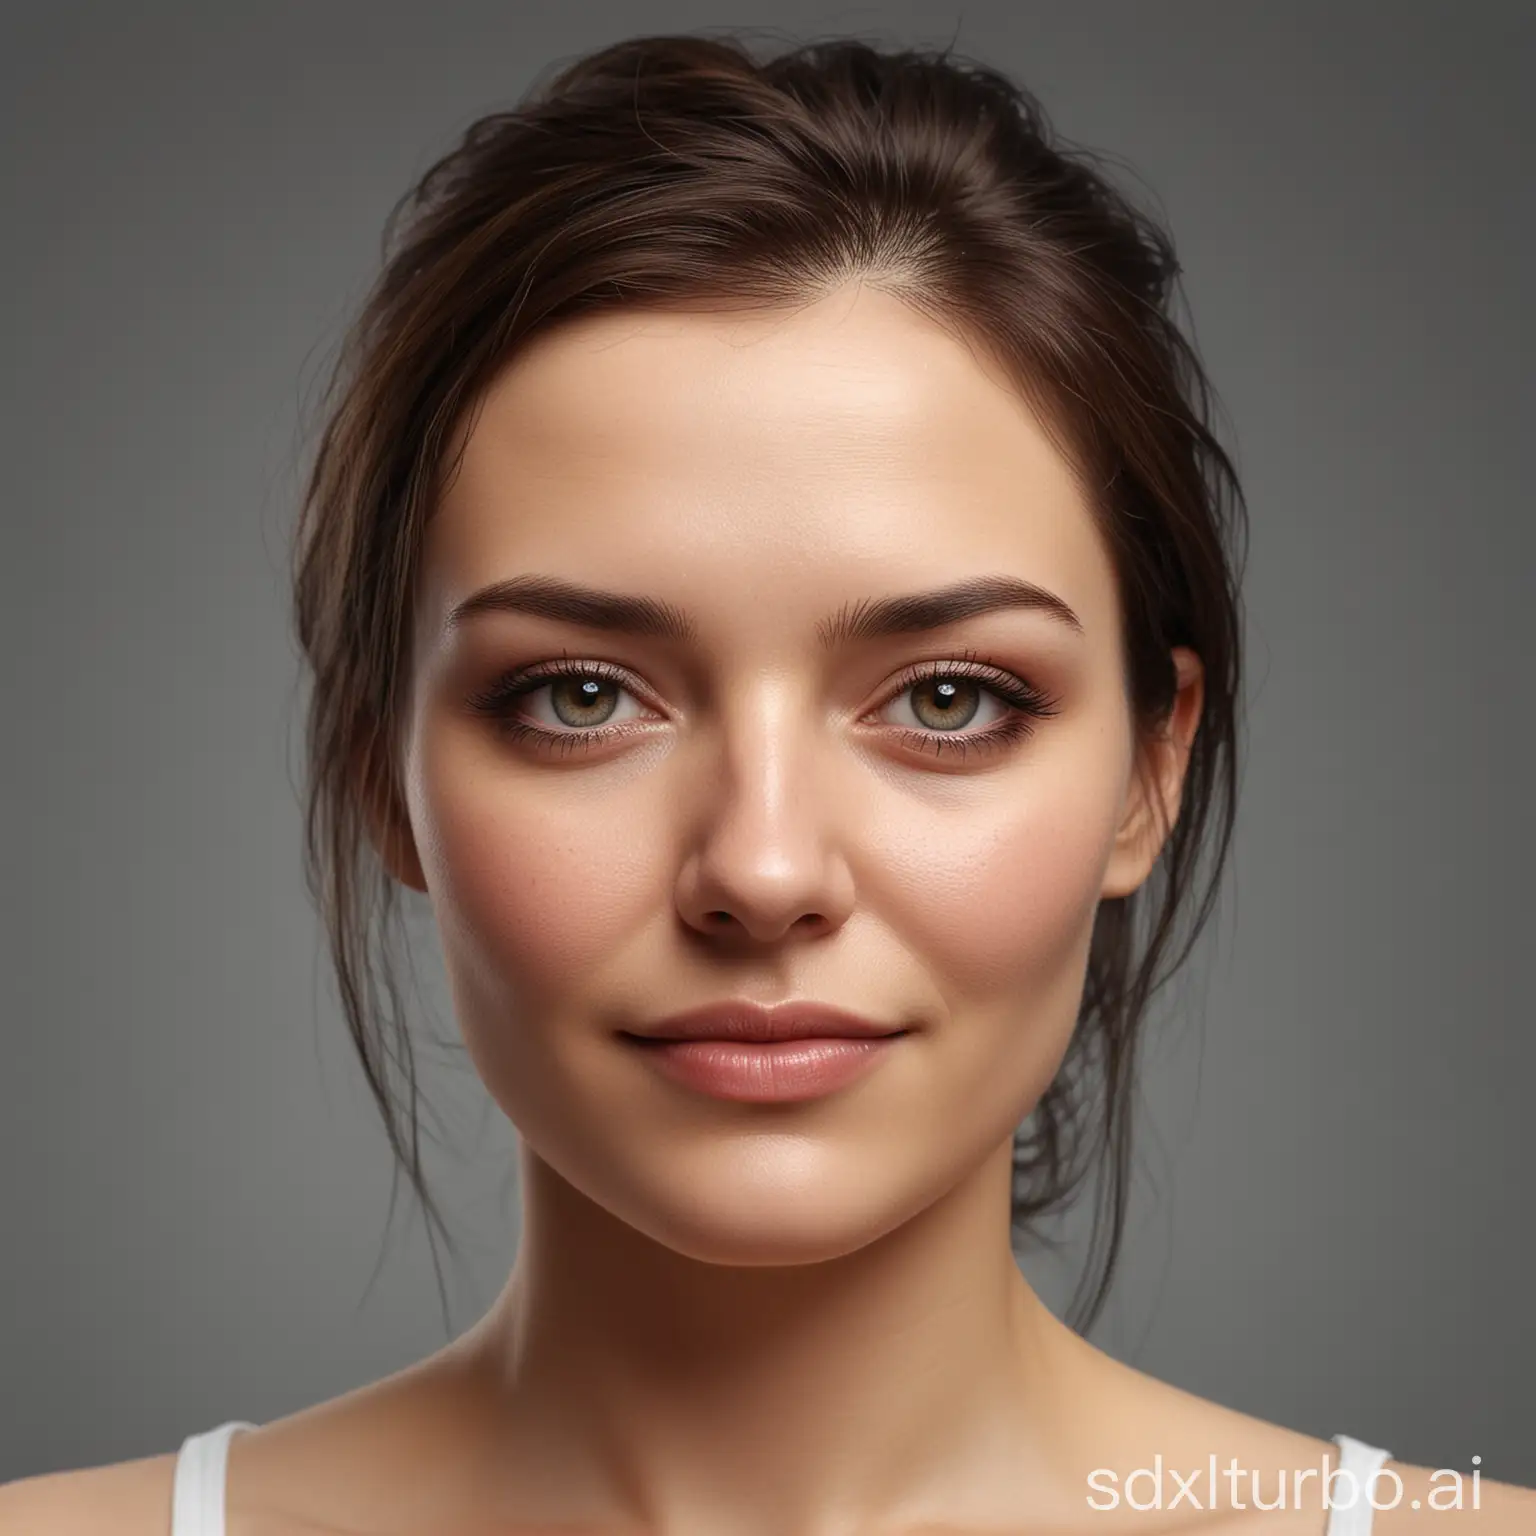 face woman beautiful without glasses ,without smiling , looking straight on and with style very realistic